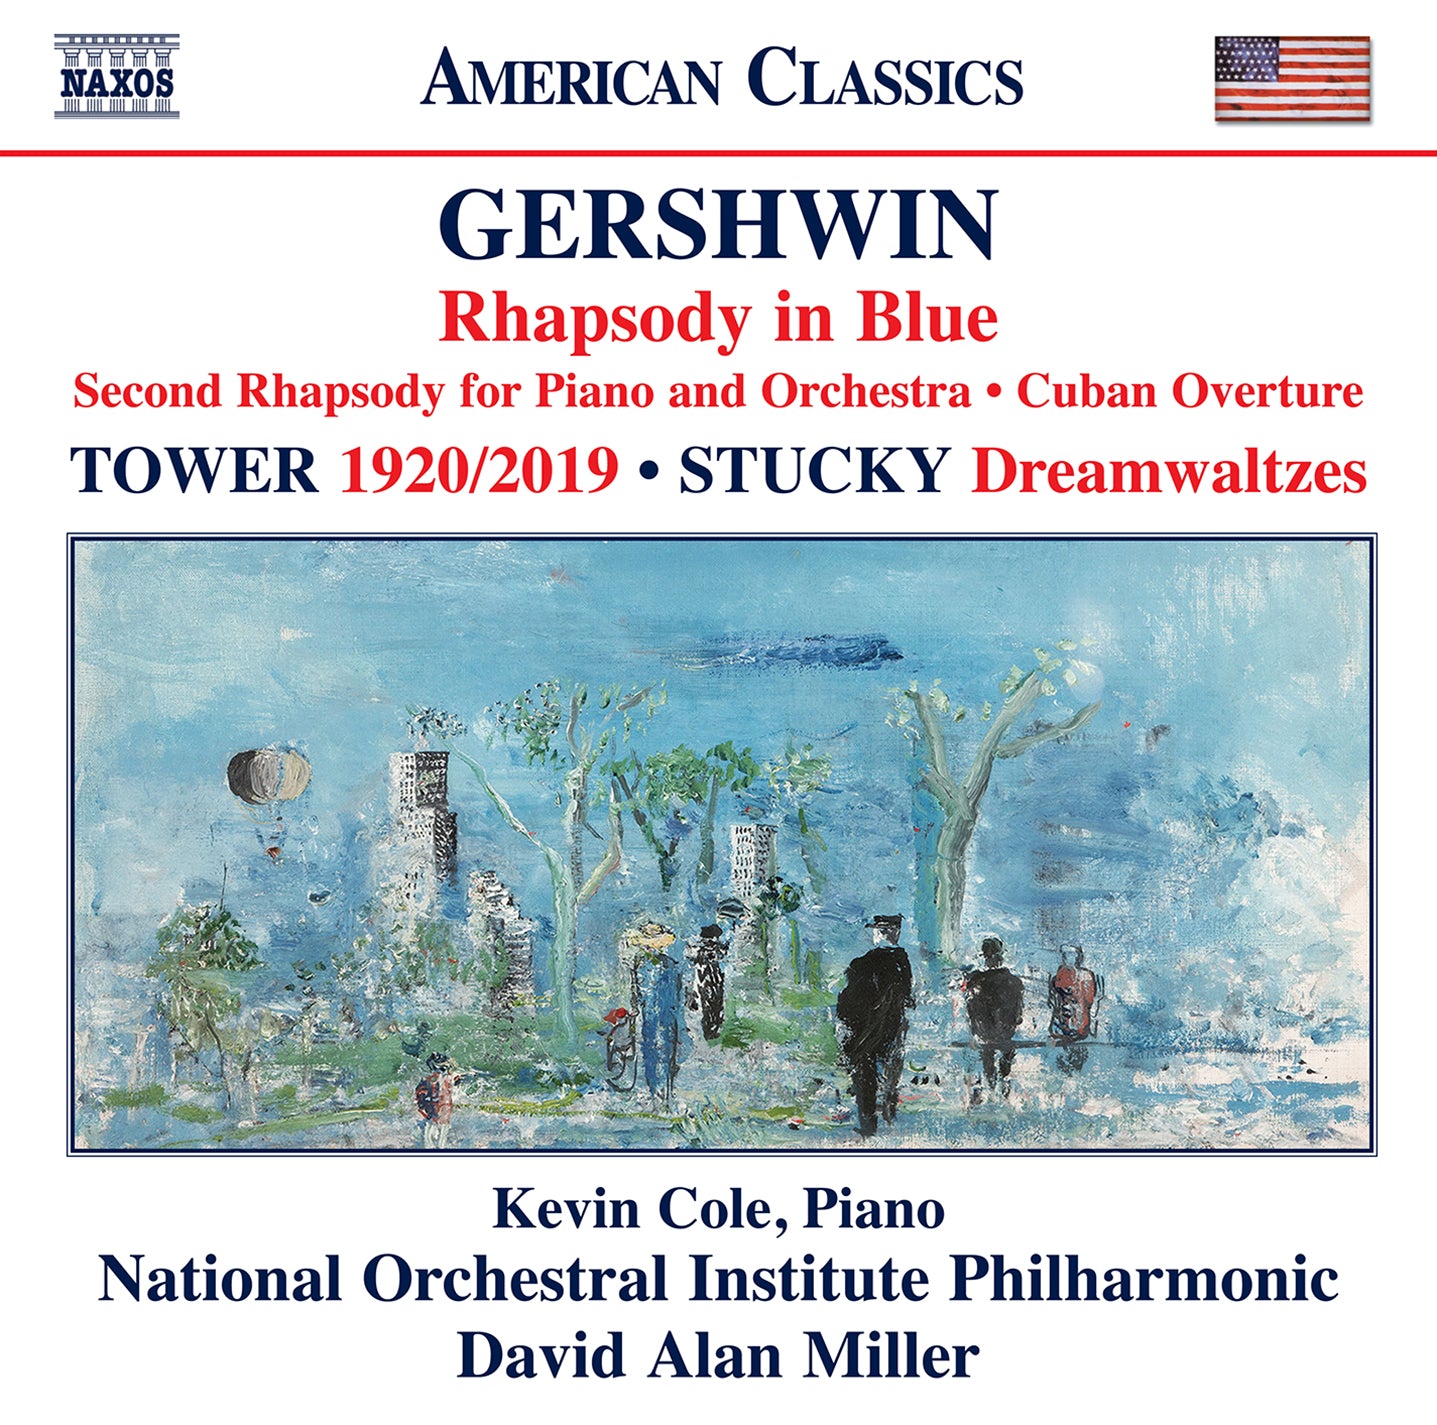 Gershwin: Rhapsody in Blue & Cuban Overture - Tower: 1920/2019 - Stucky: Dreamwaltzes / Cole, Kevin; National Orchestral Institute Philharmonic; Miller, David Alan